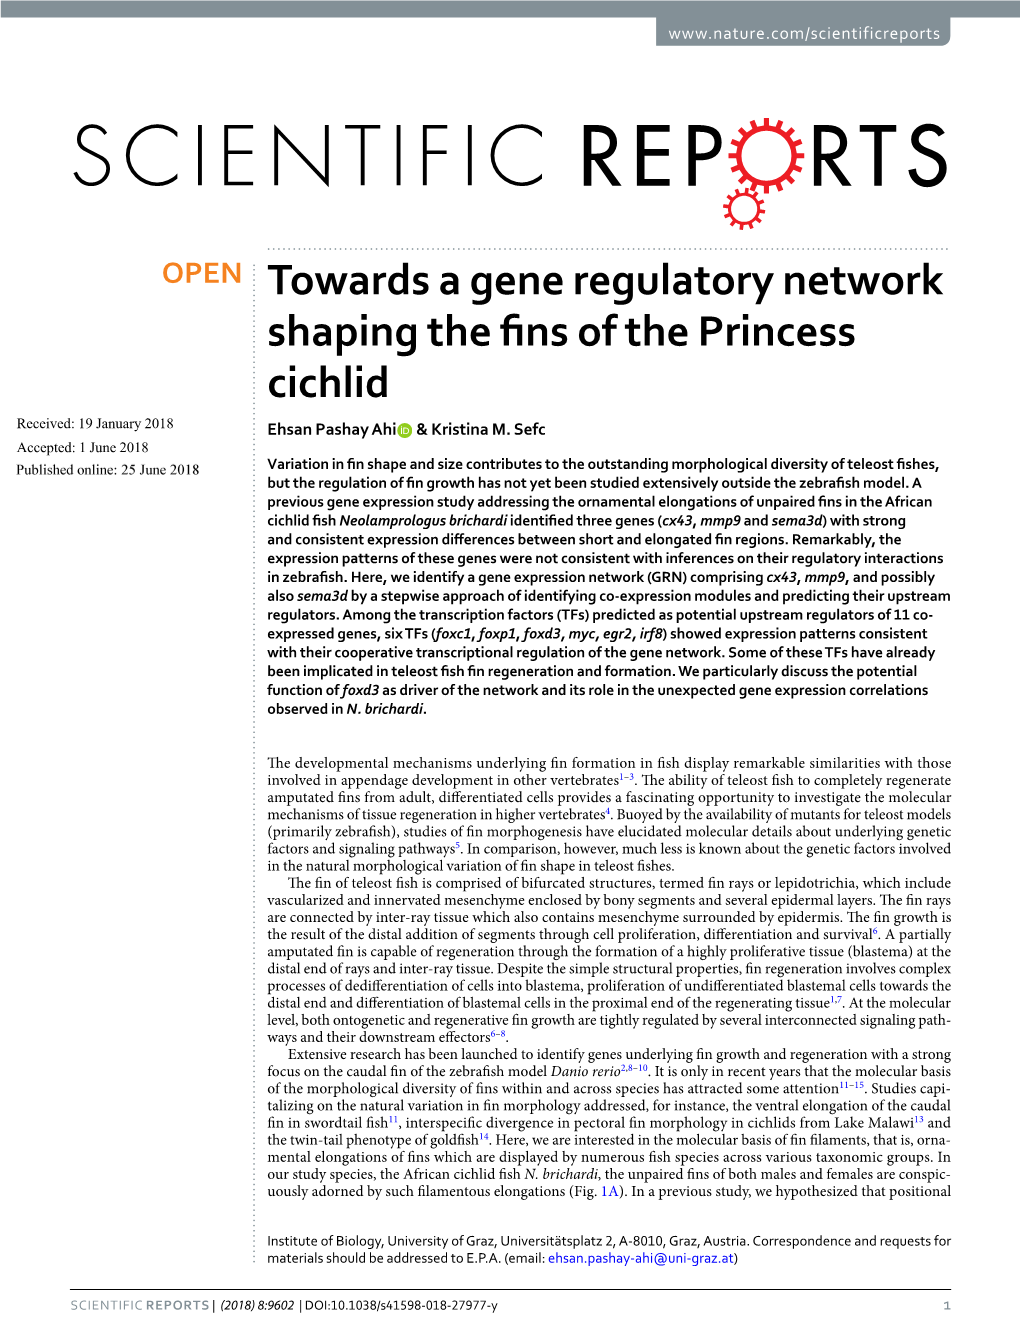 Towards a Gene Regulatory Network Shaping the Fins of the Princess Cichlid